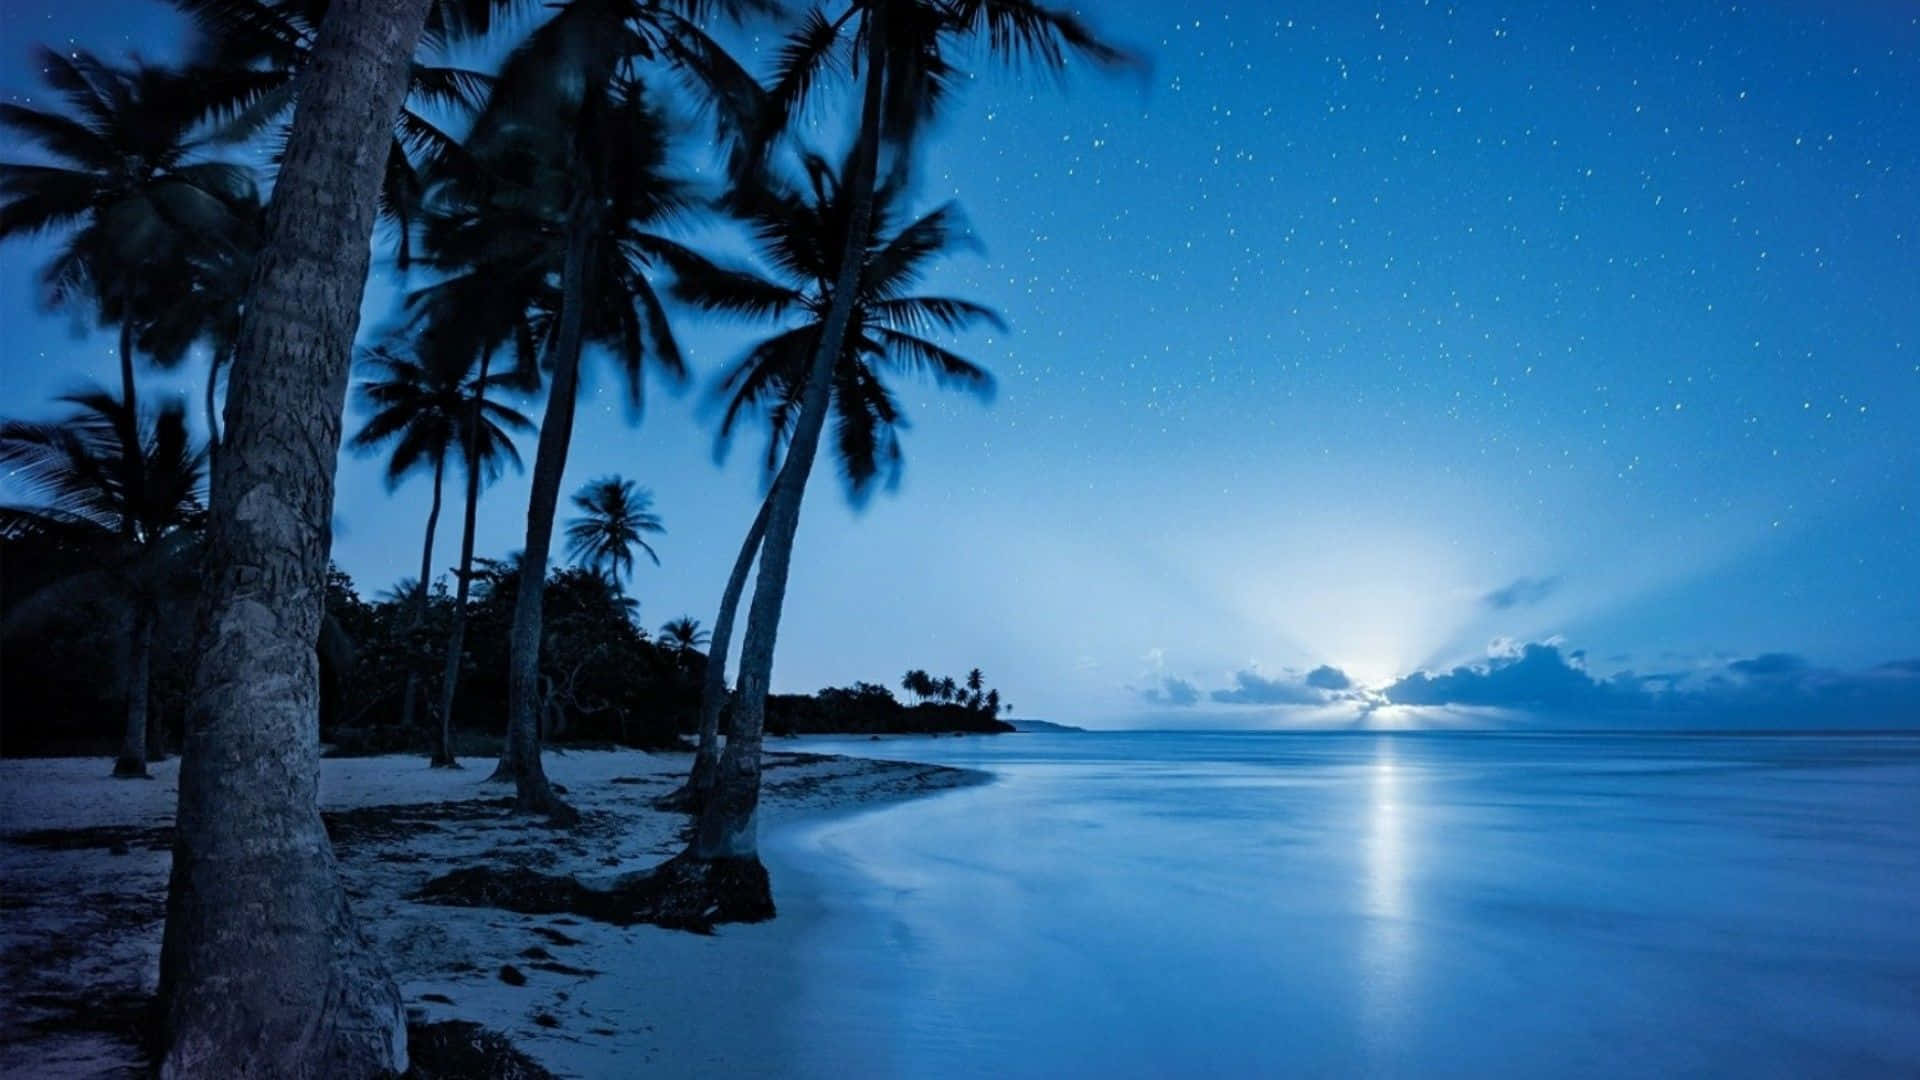 Relax by the beach and enjoy the ocean's beauty Wallpaper